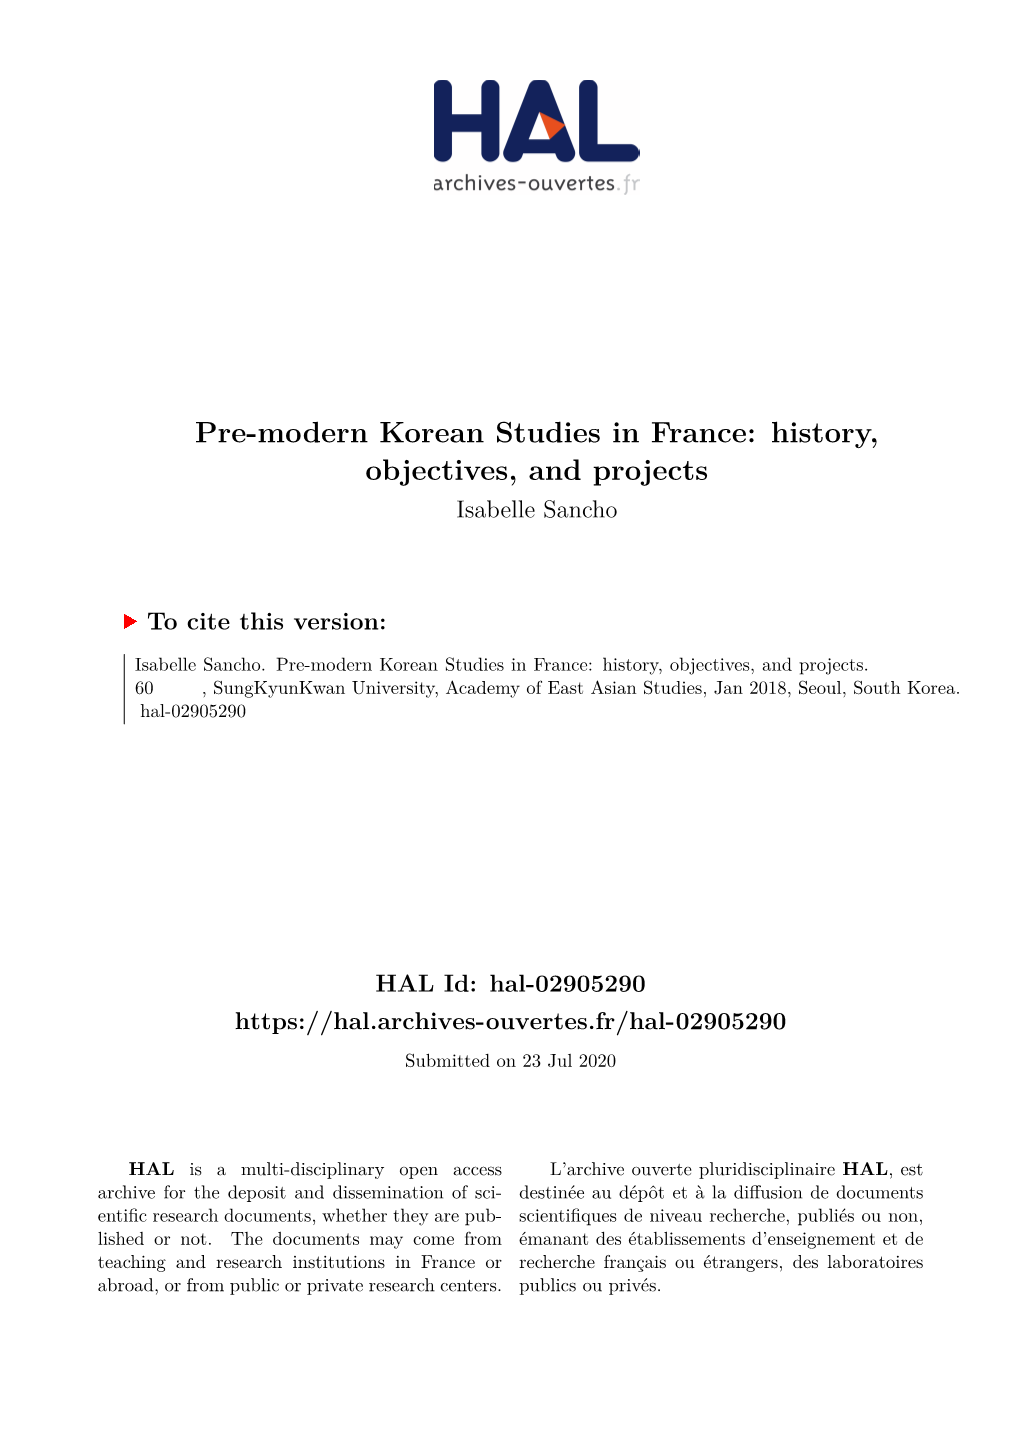 Pre-Modern Korean Studies in France: History, Objectives, and Projects Isabelle Sancho